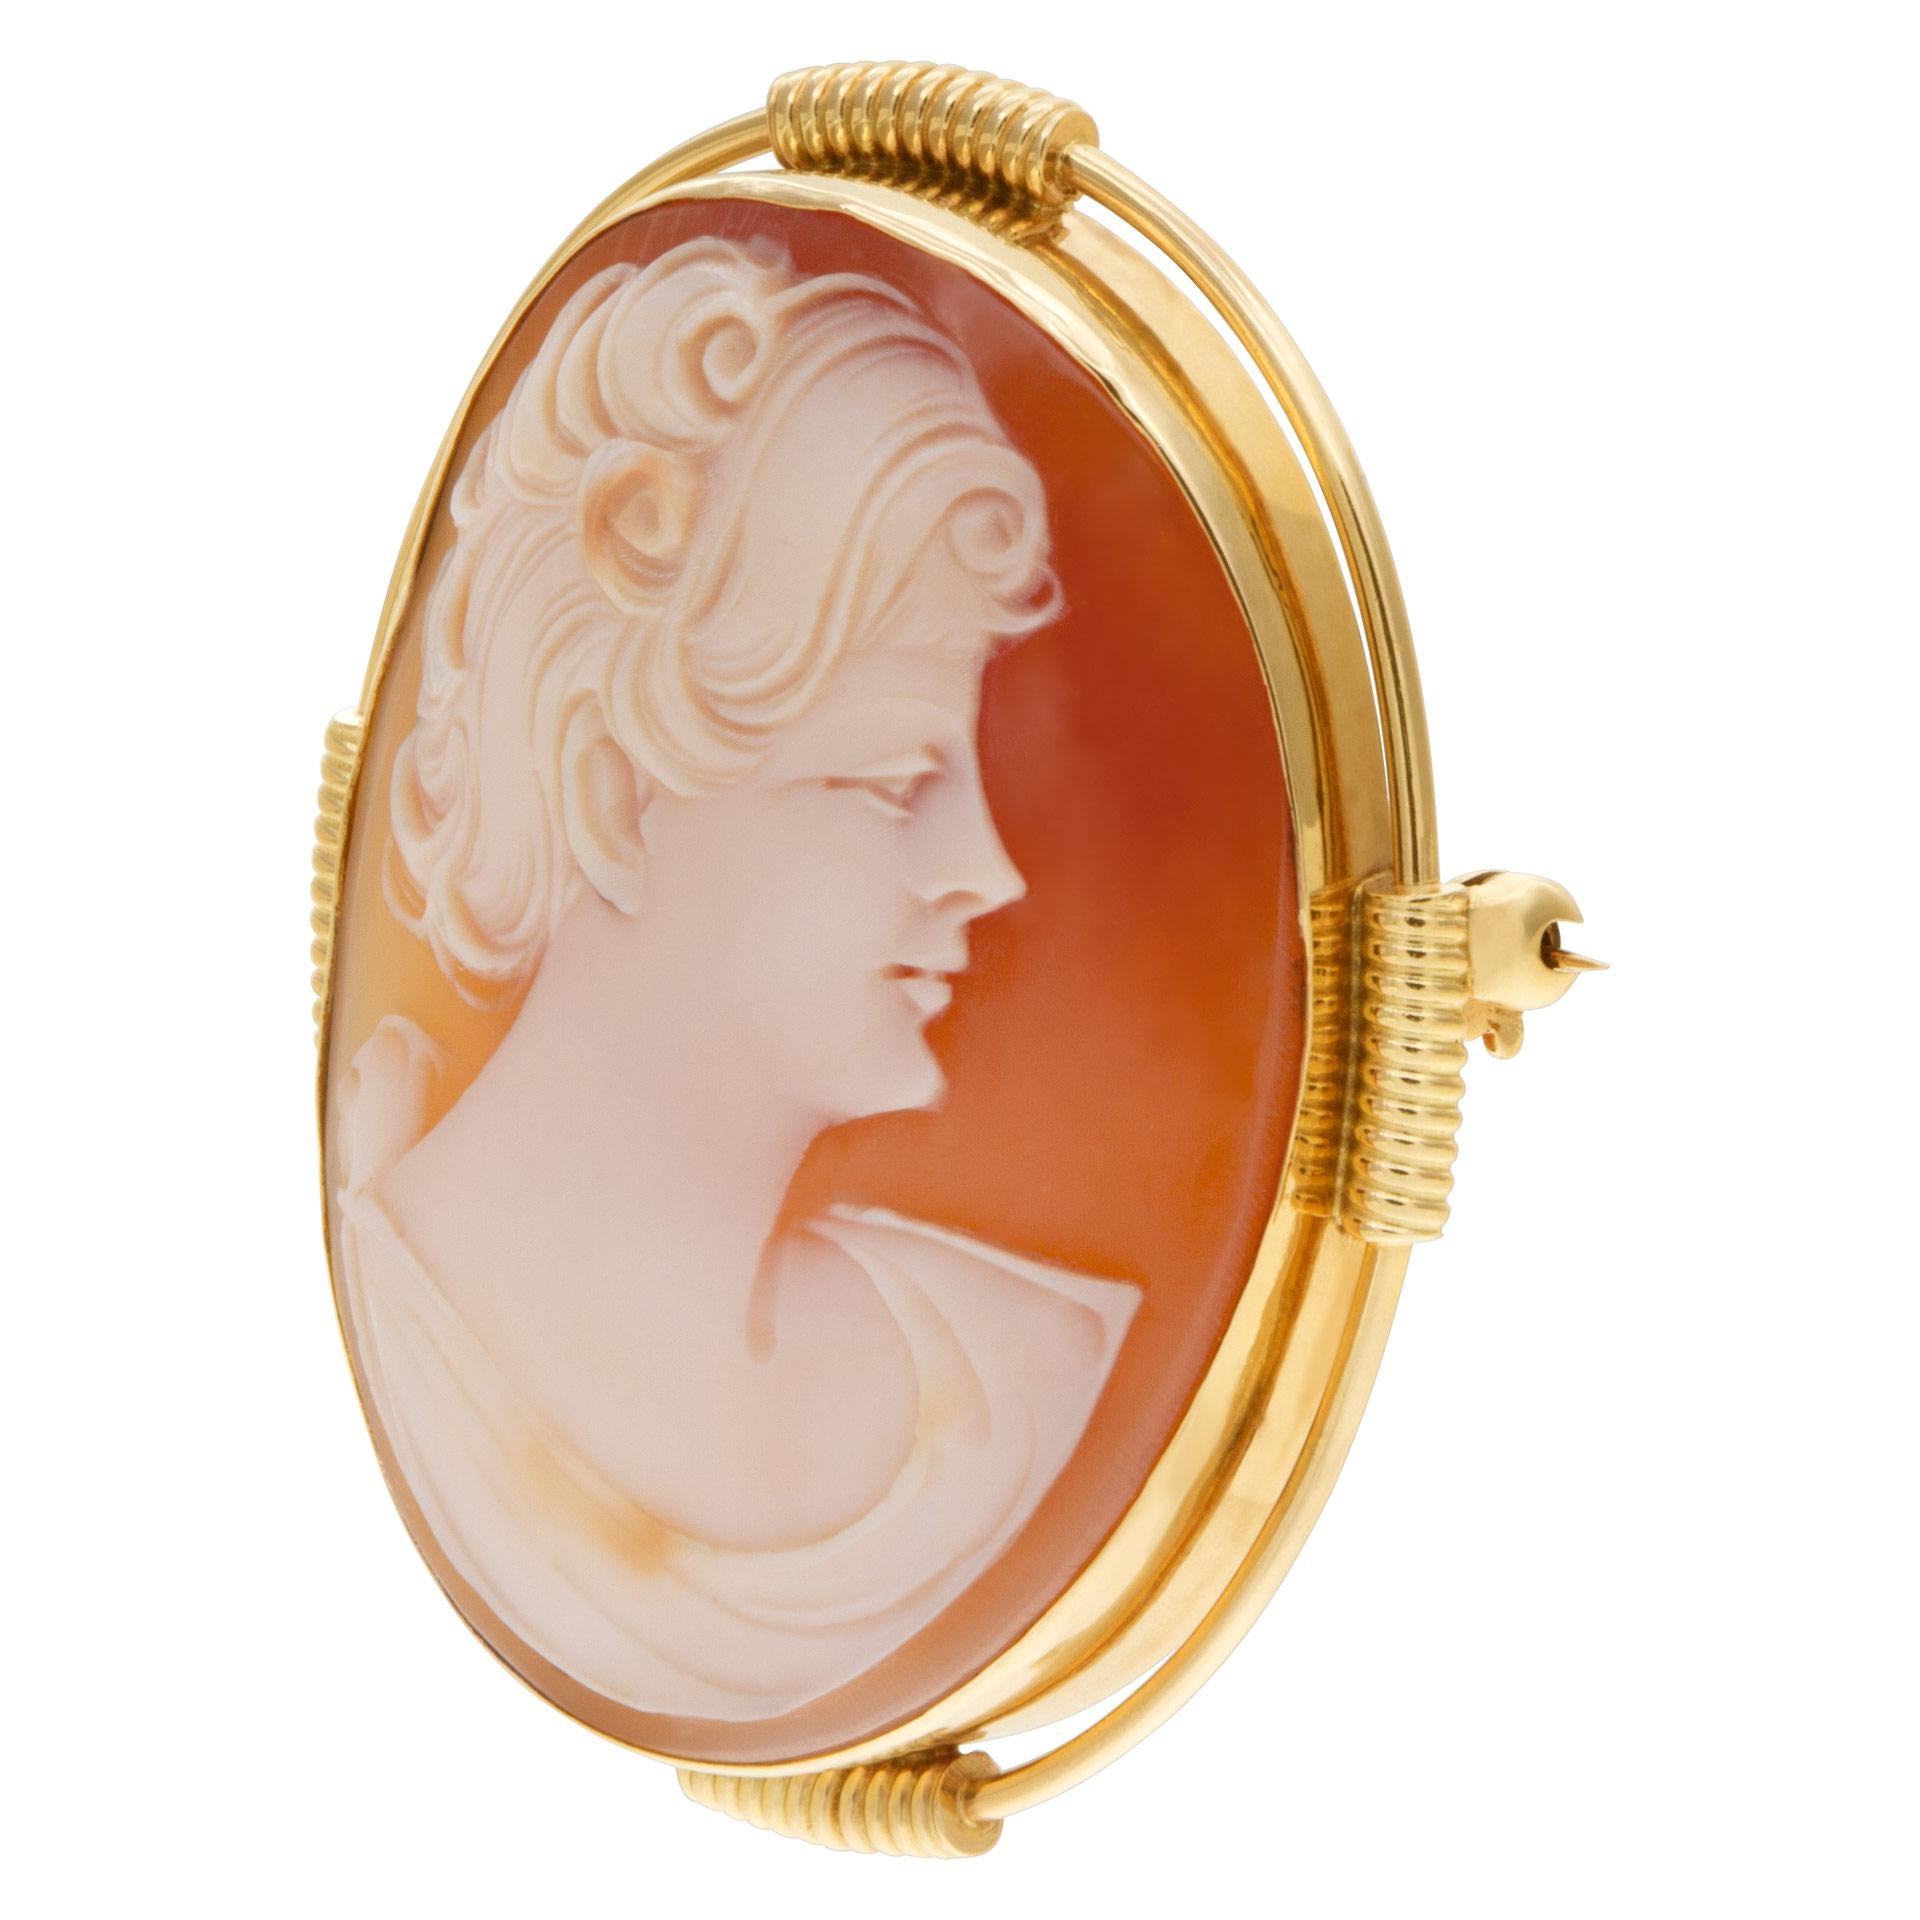 Shell Cameo pin/pendant portrait of a short hair lady set in 14k yellow gold, 39.5mm length x 32mm width.
